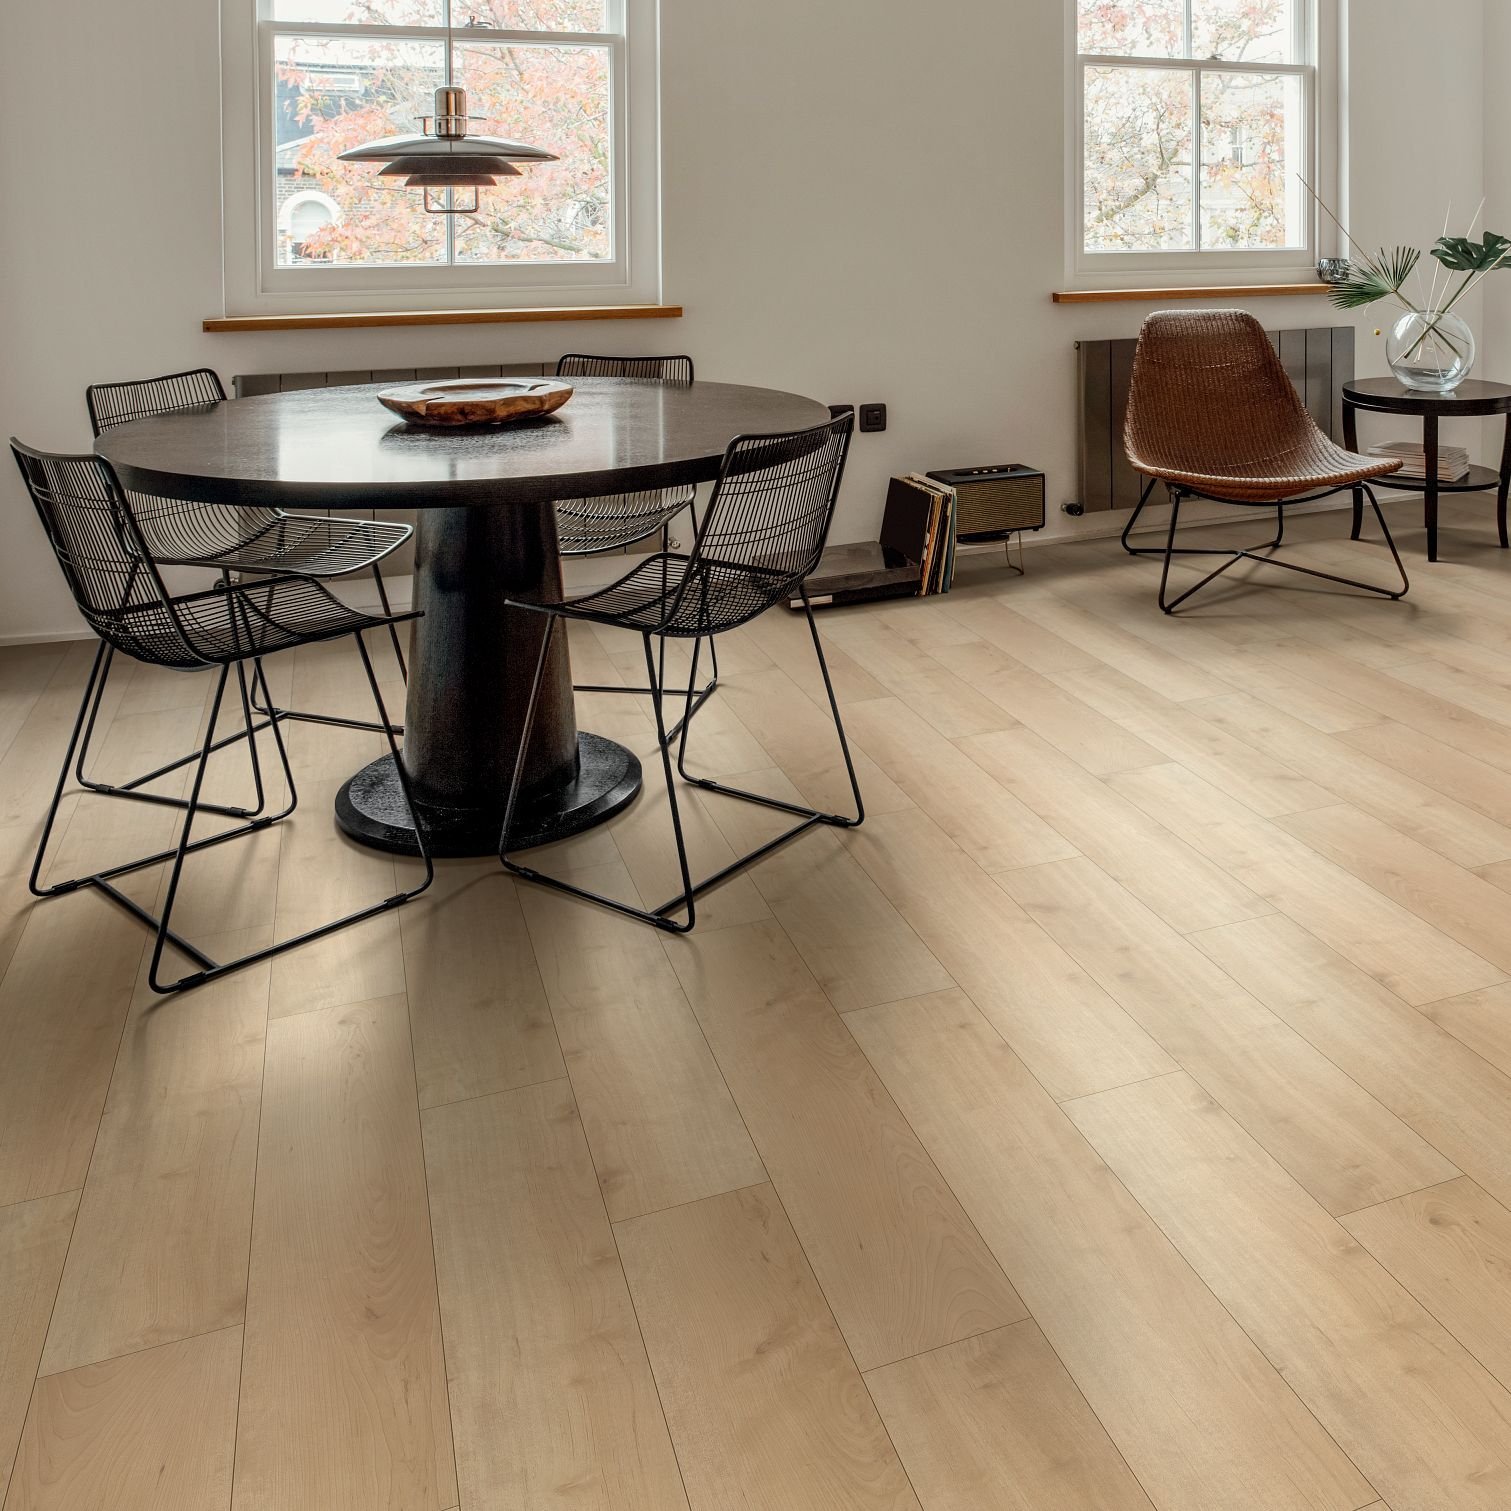 Dining room with wood-look laminate flooring from 180 Degree Floors in the Nashville, TN area